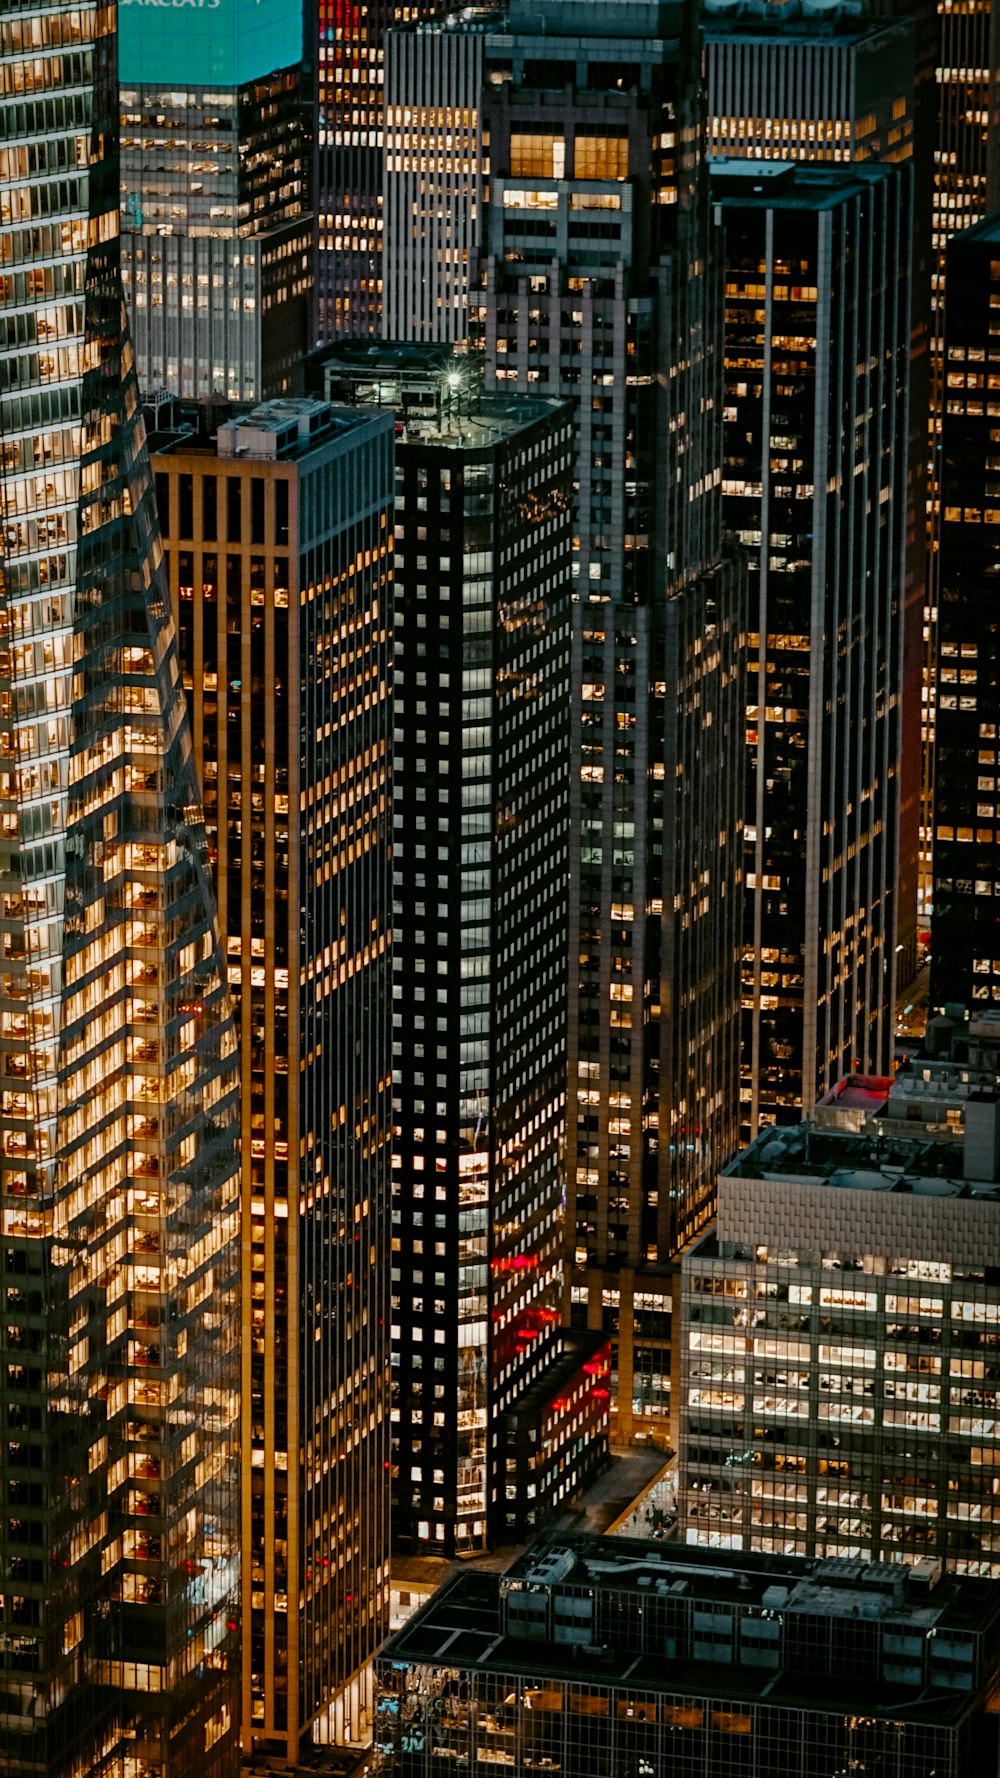 turned-on lights of high-rise building